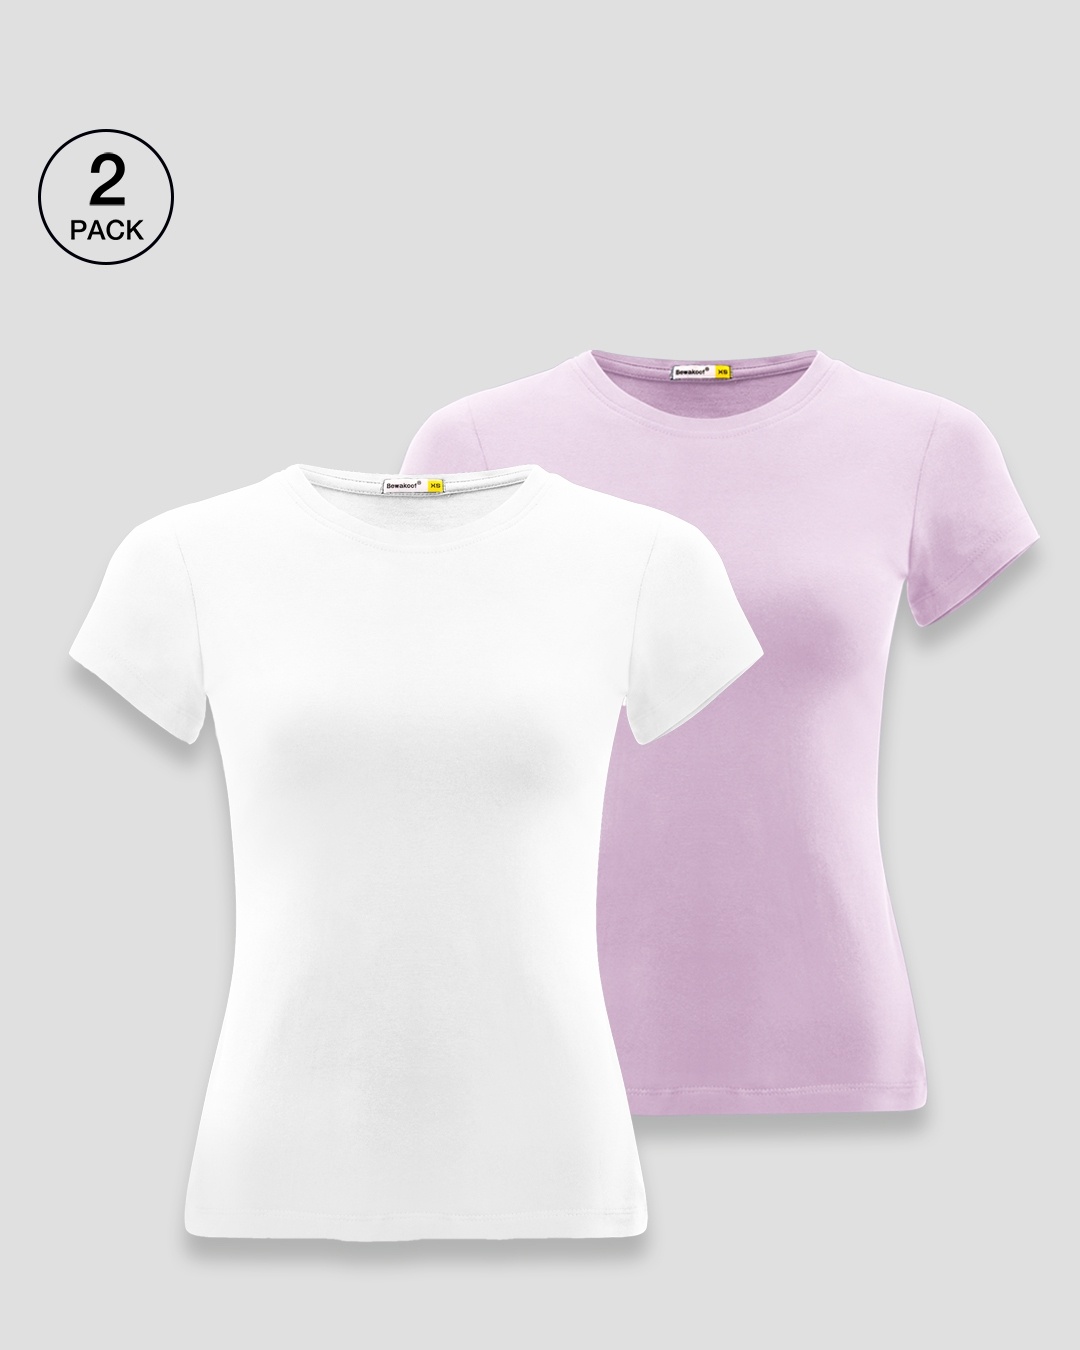 Shop Women's Whit & Purple Slim Fit T-shirt Pack of 2-Front